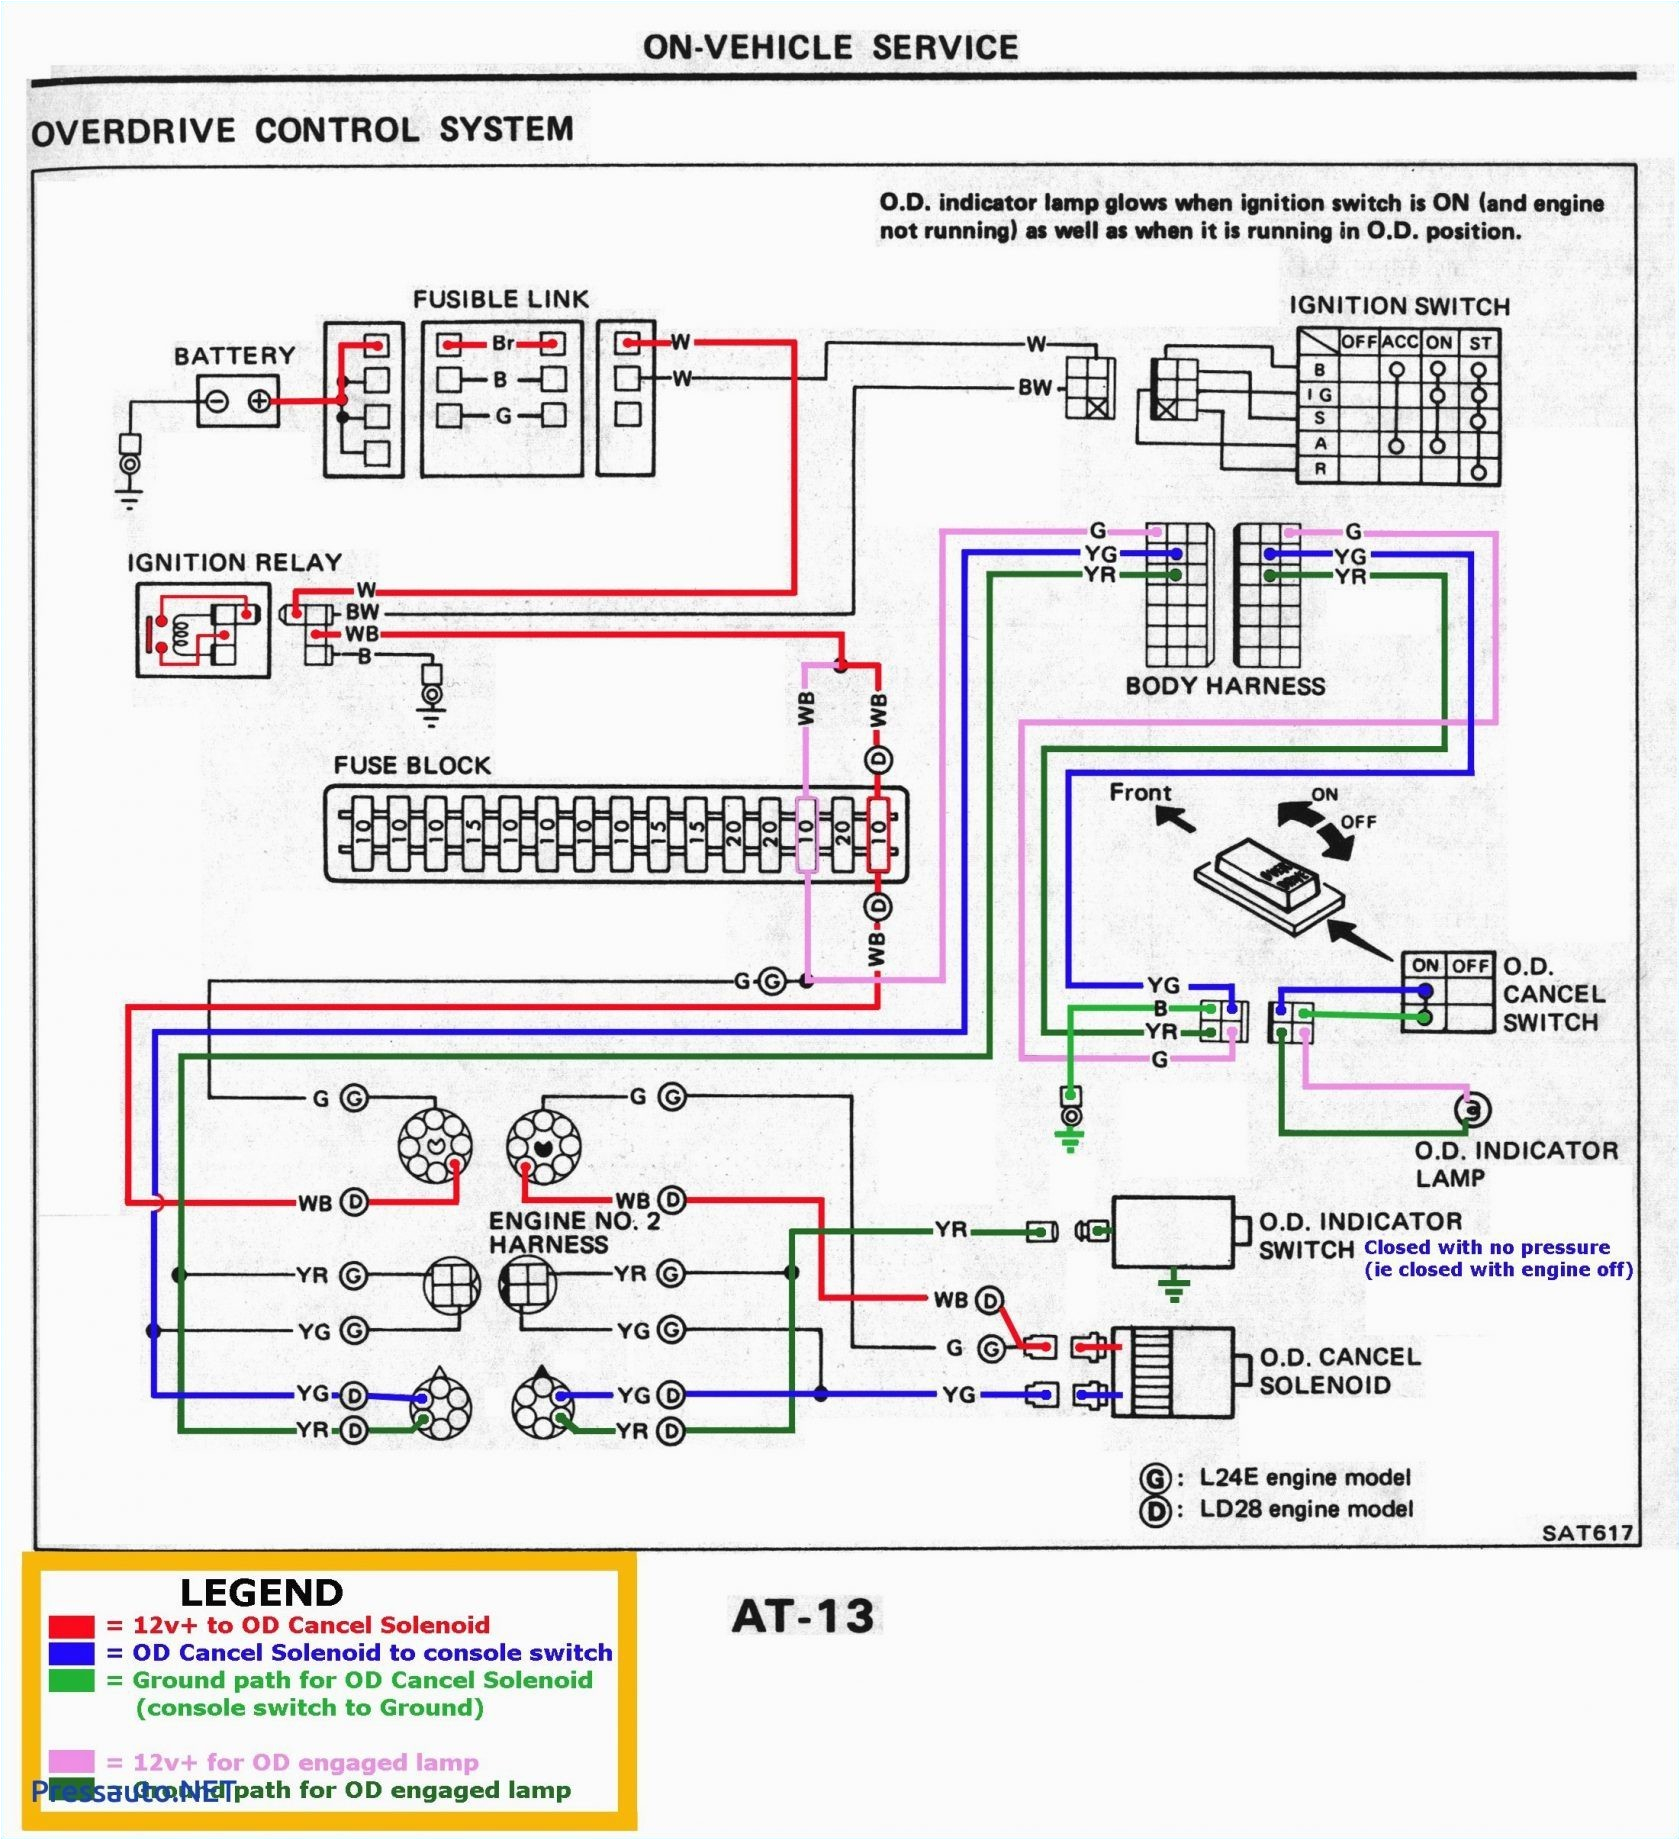 2001 dodge stratus radio wiring wiring schematic diagram 52 2001fordfocusradiowiring have included a diagram of the radio source 2002 ford focus